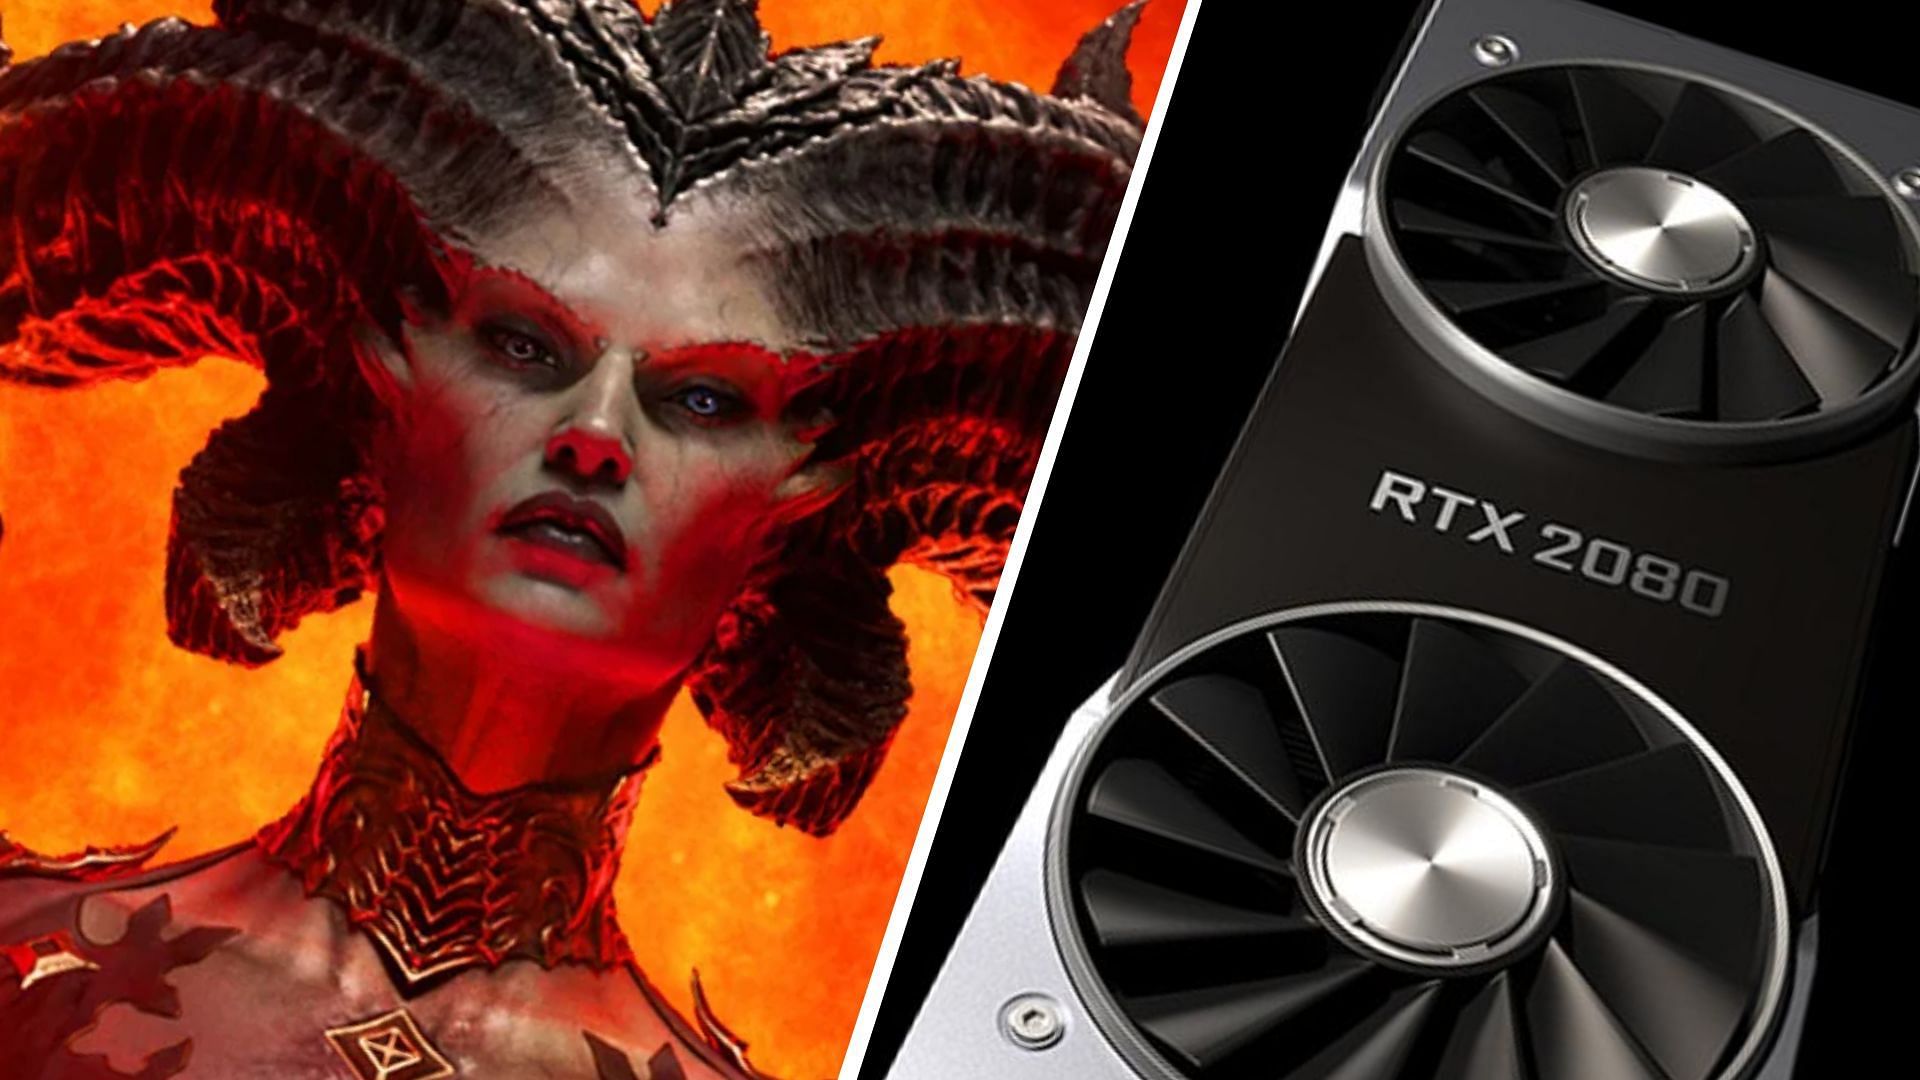 The RTX 2080 and 2080 Super can easily play Diablo 4 (Image via Blizzard and Nvidia)